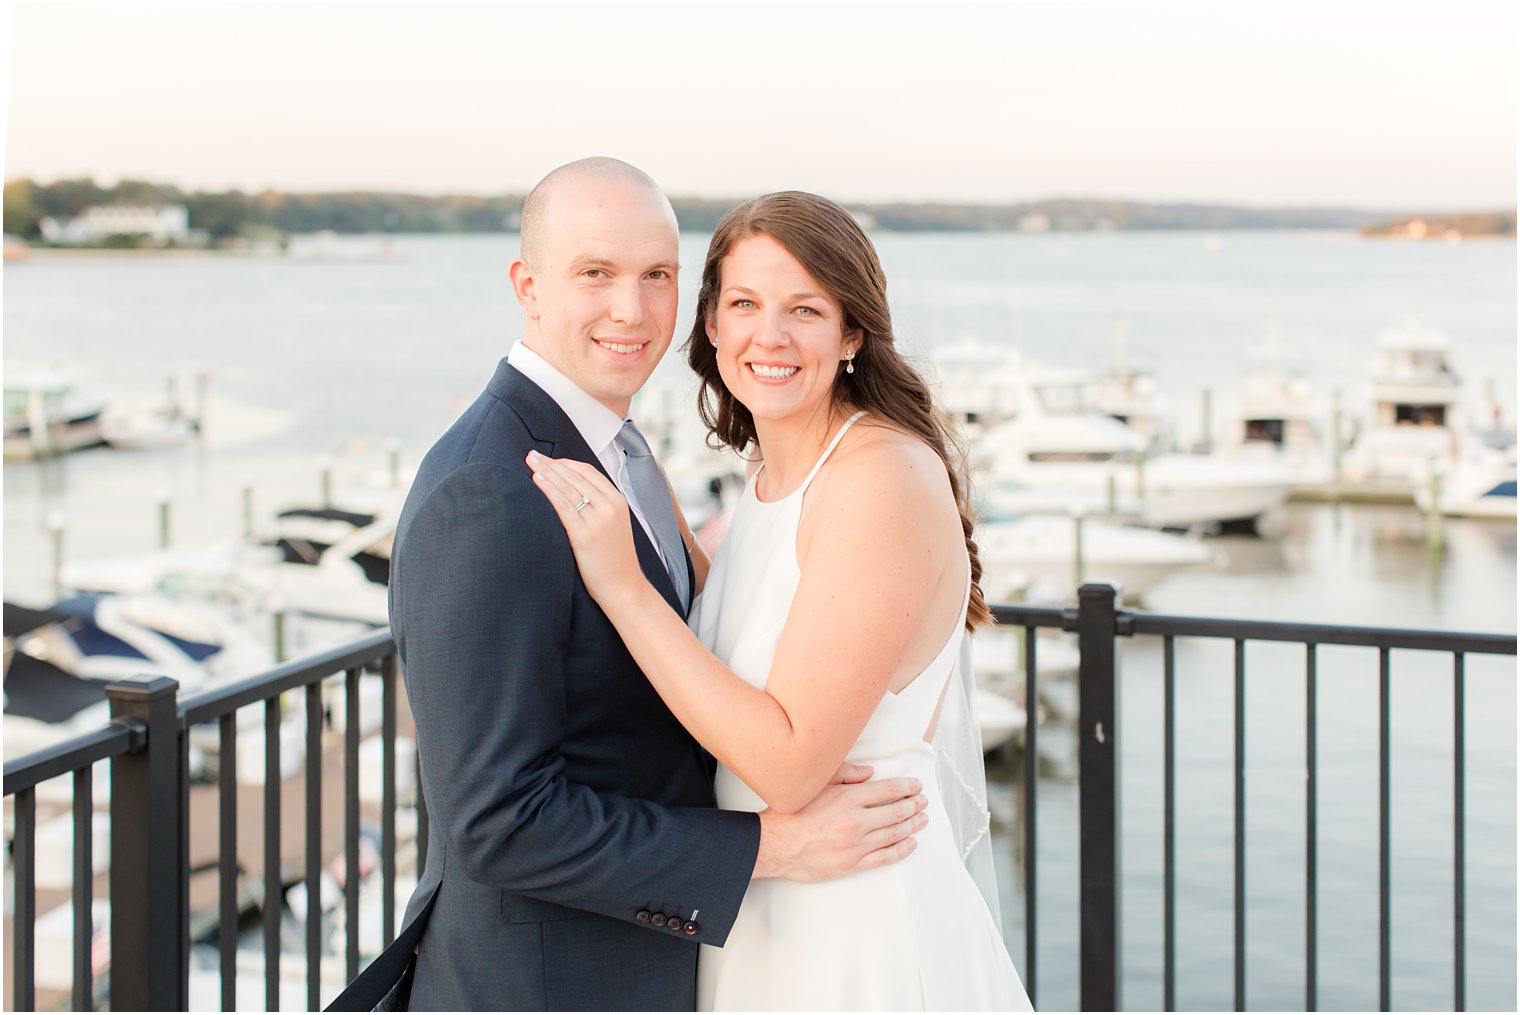 newlyweds pose on Molly Pitcher Inn balcony overlooking water 